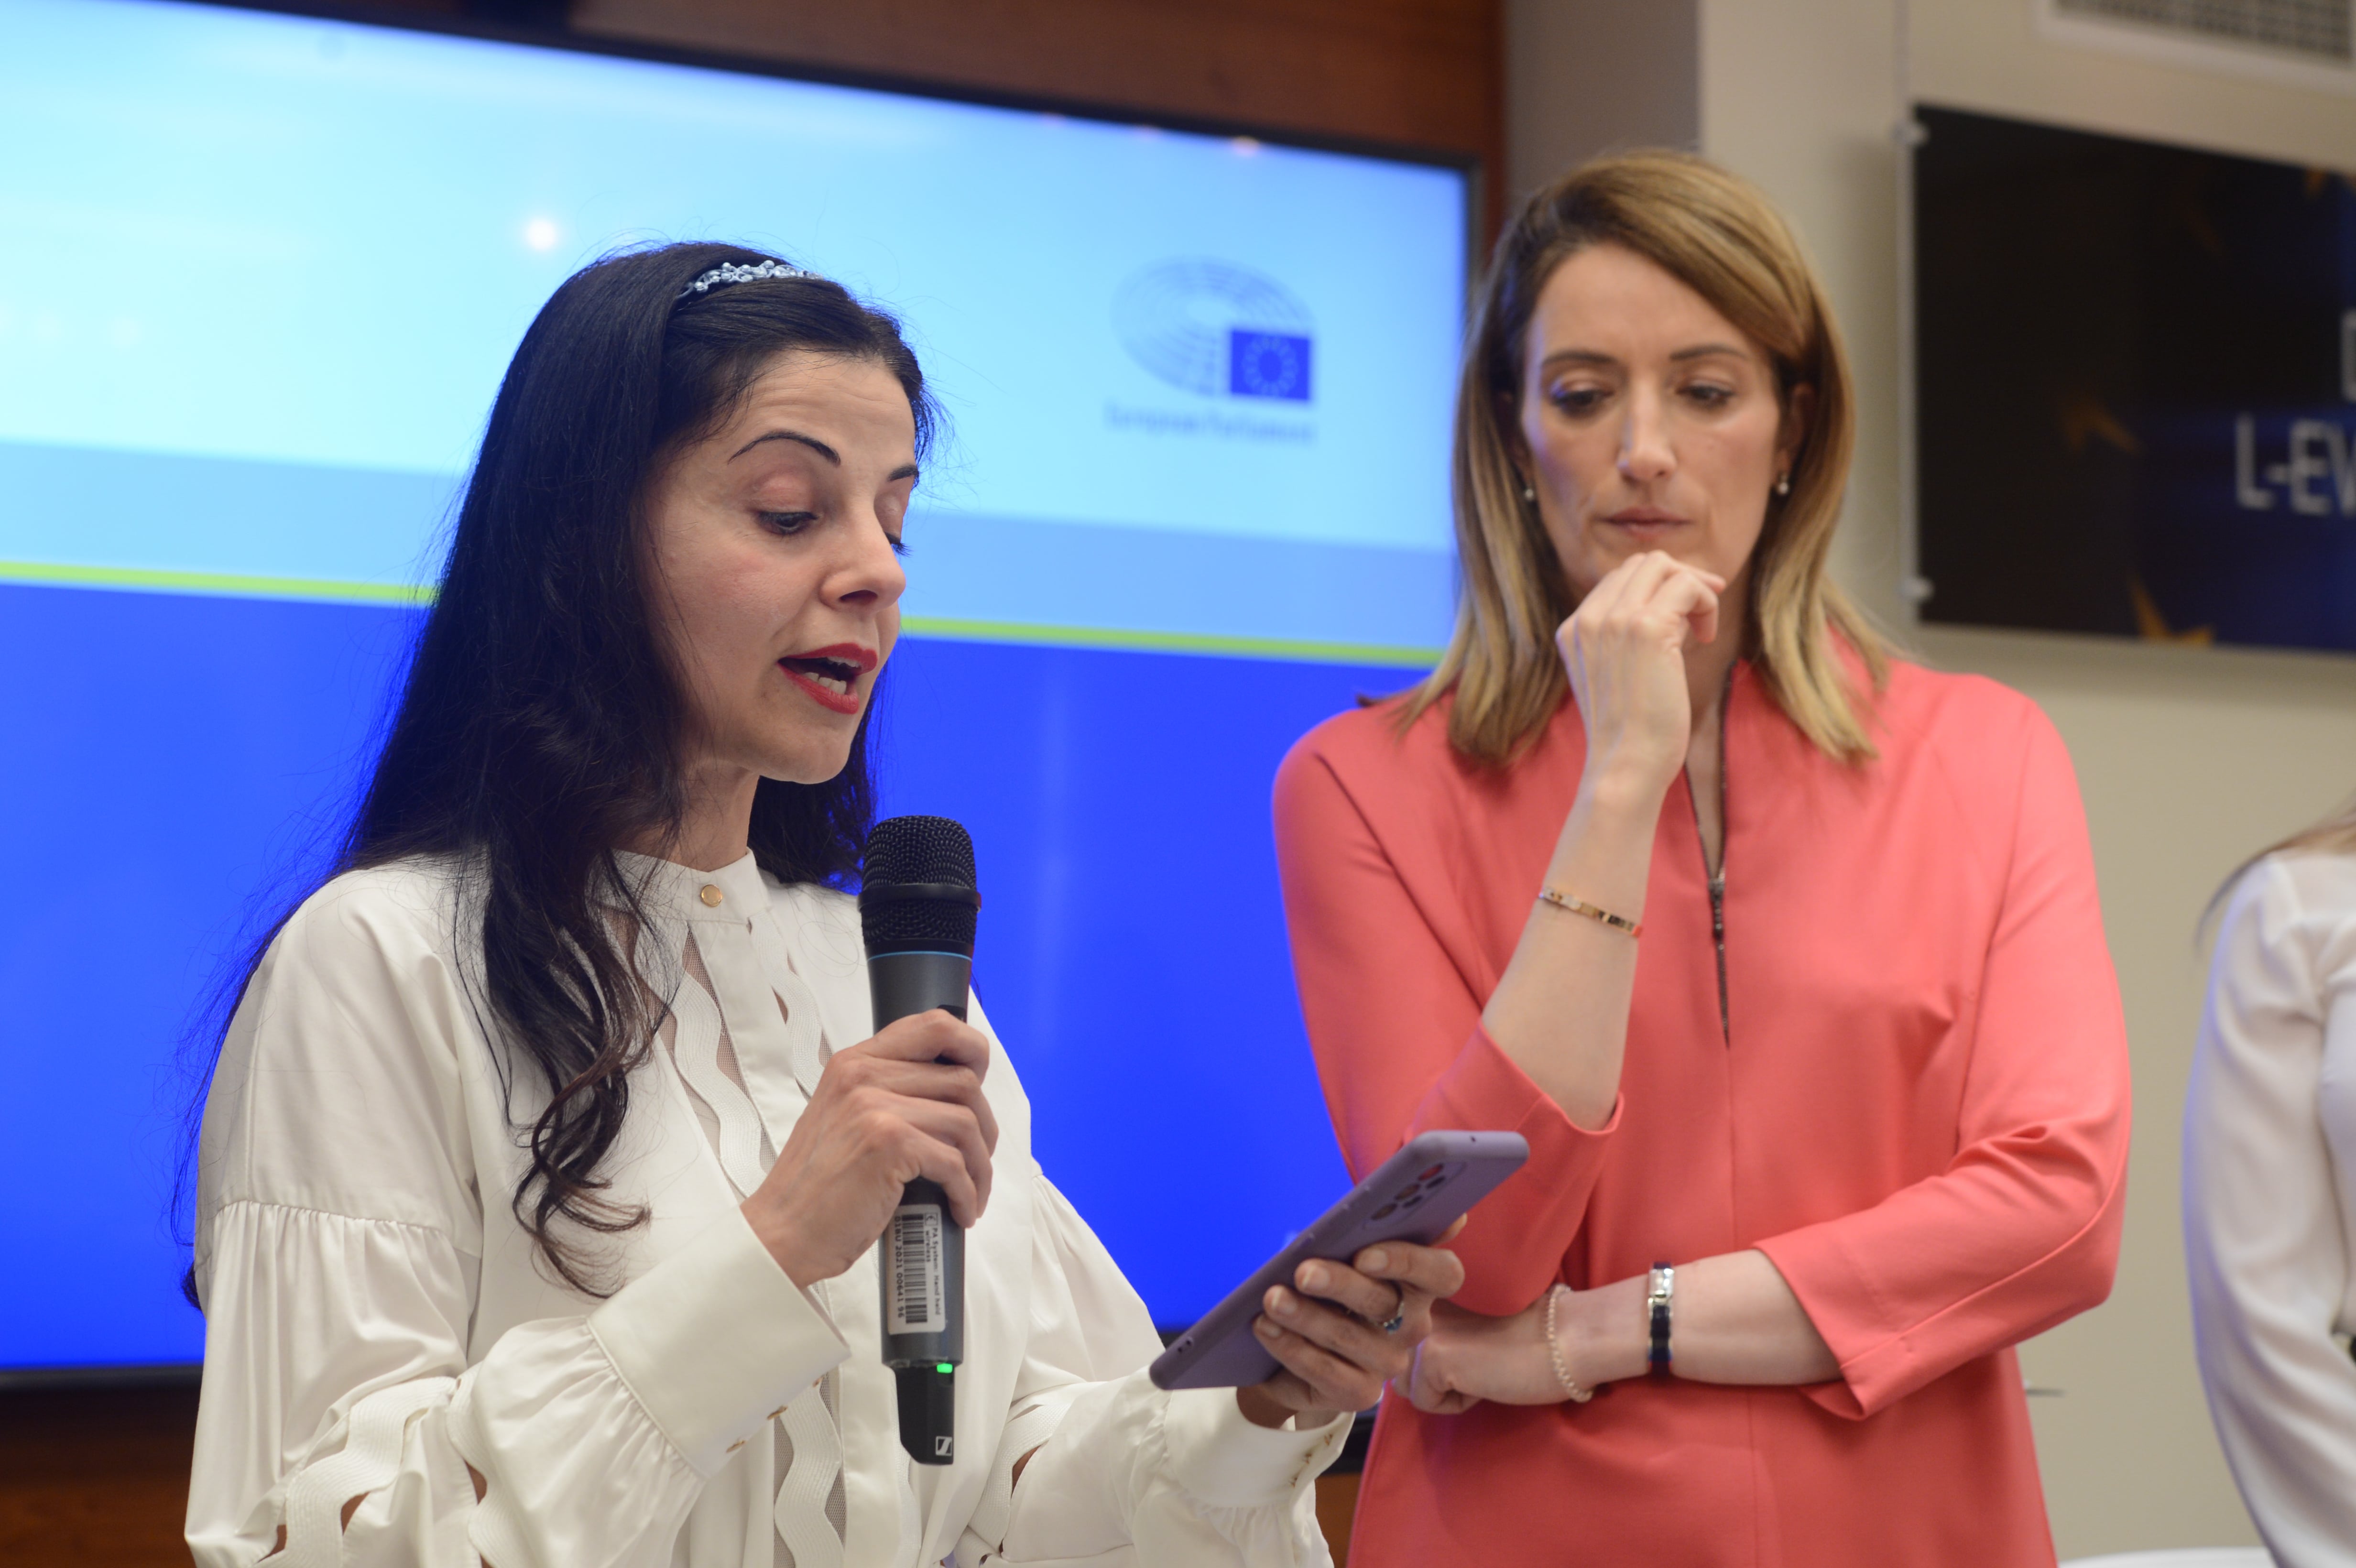 Iranian artist Lida Sherafatmand addressing the audience at the International Women's Day event at Europe House